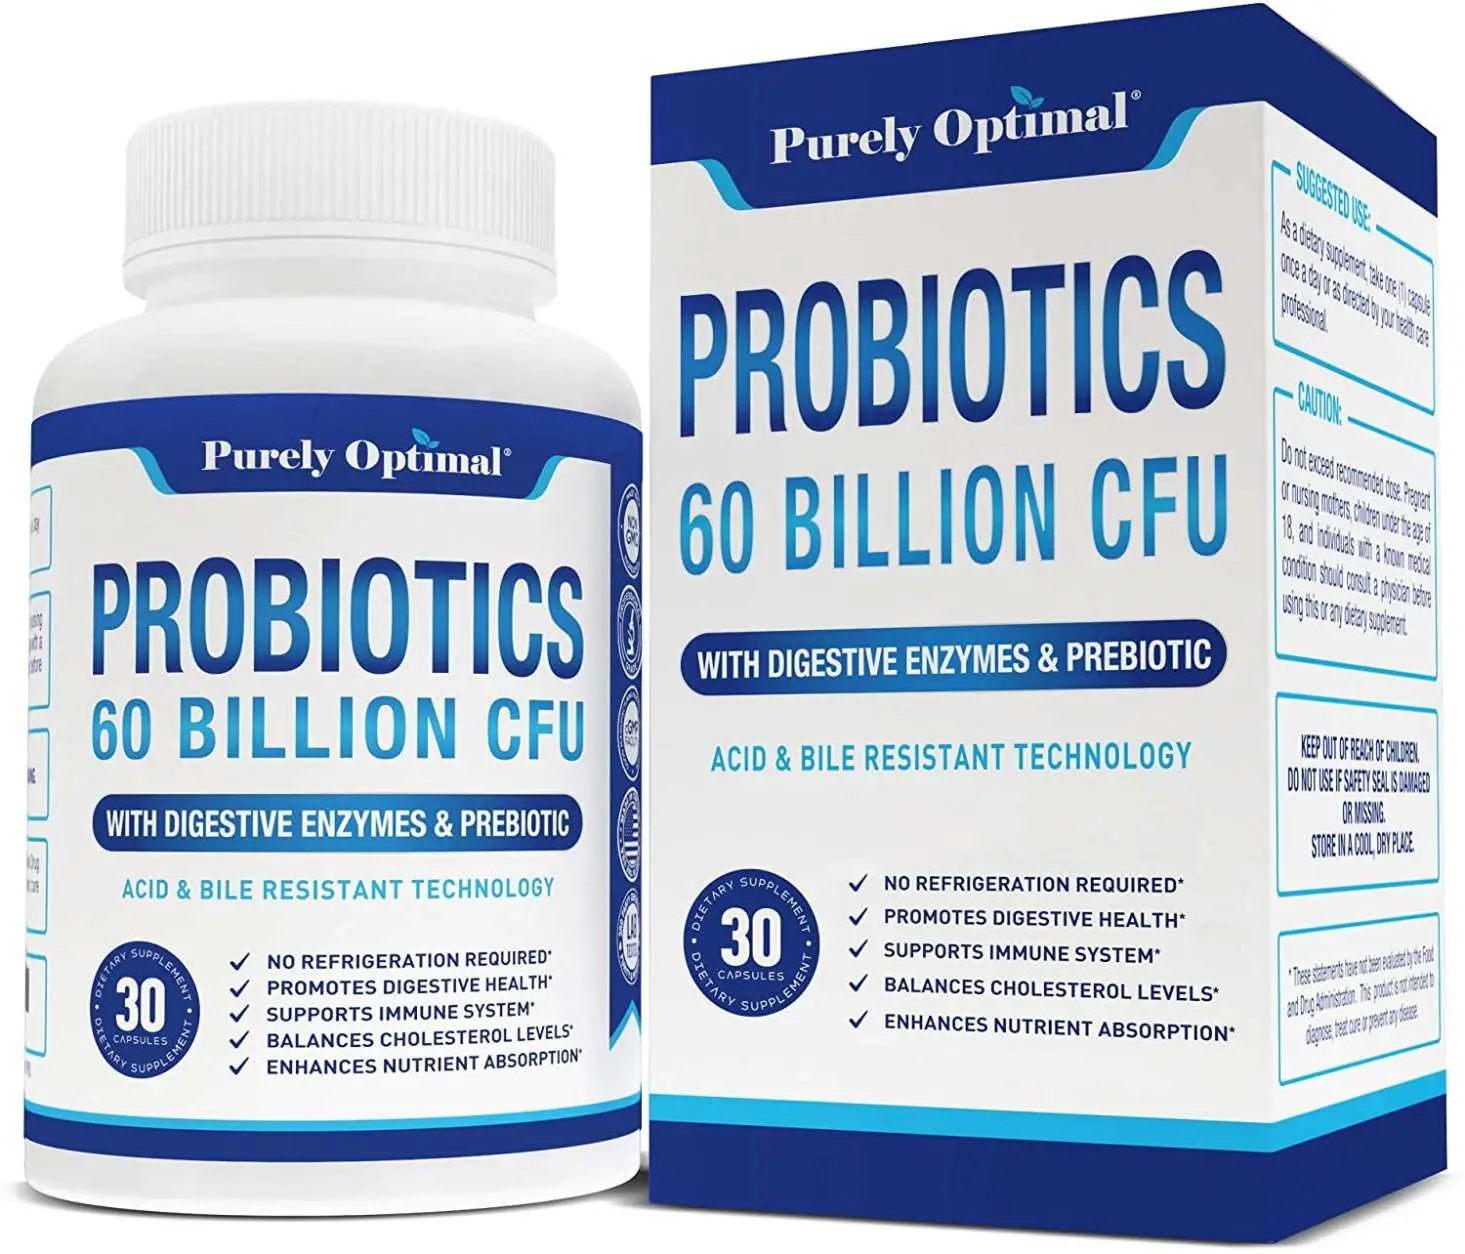 Best Probiotics For Weight Loss in 2021